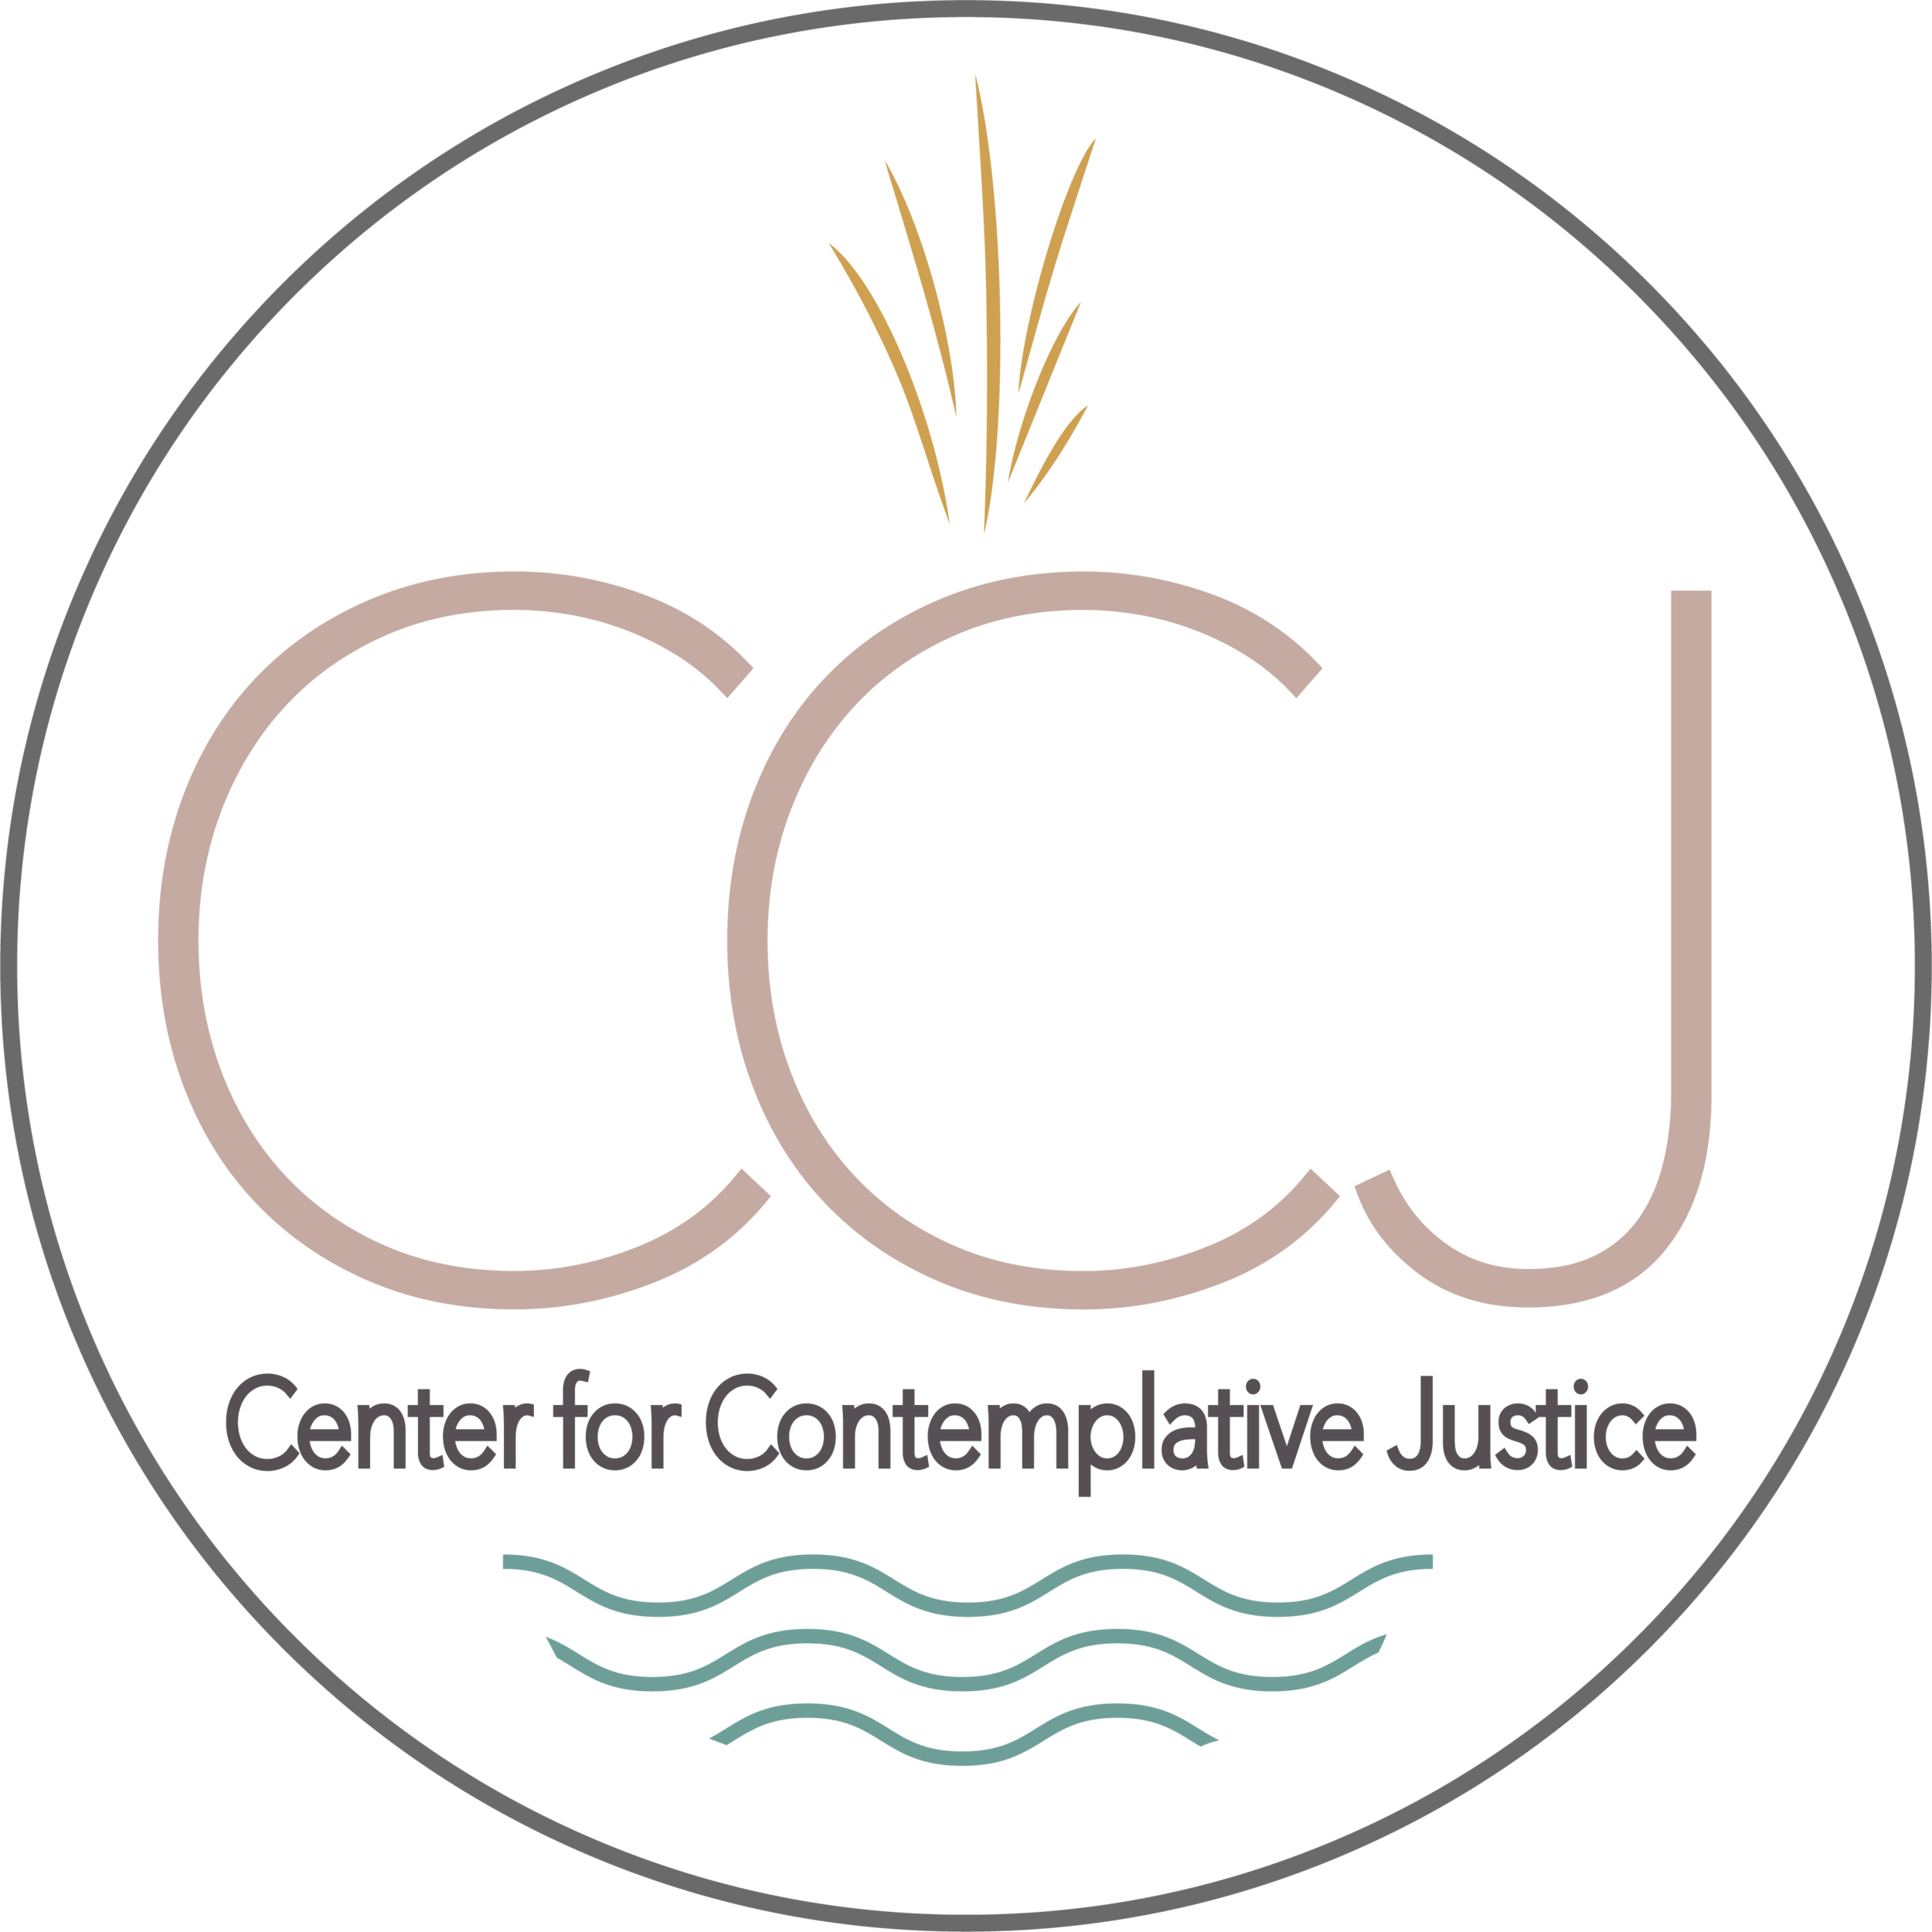 The Center for Contemplative Justice